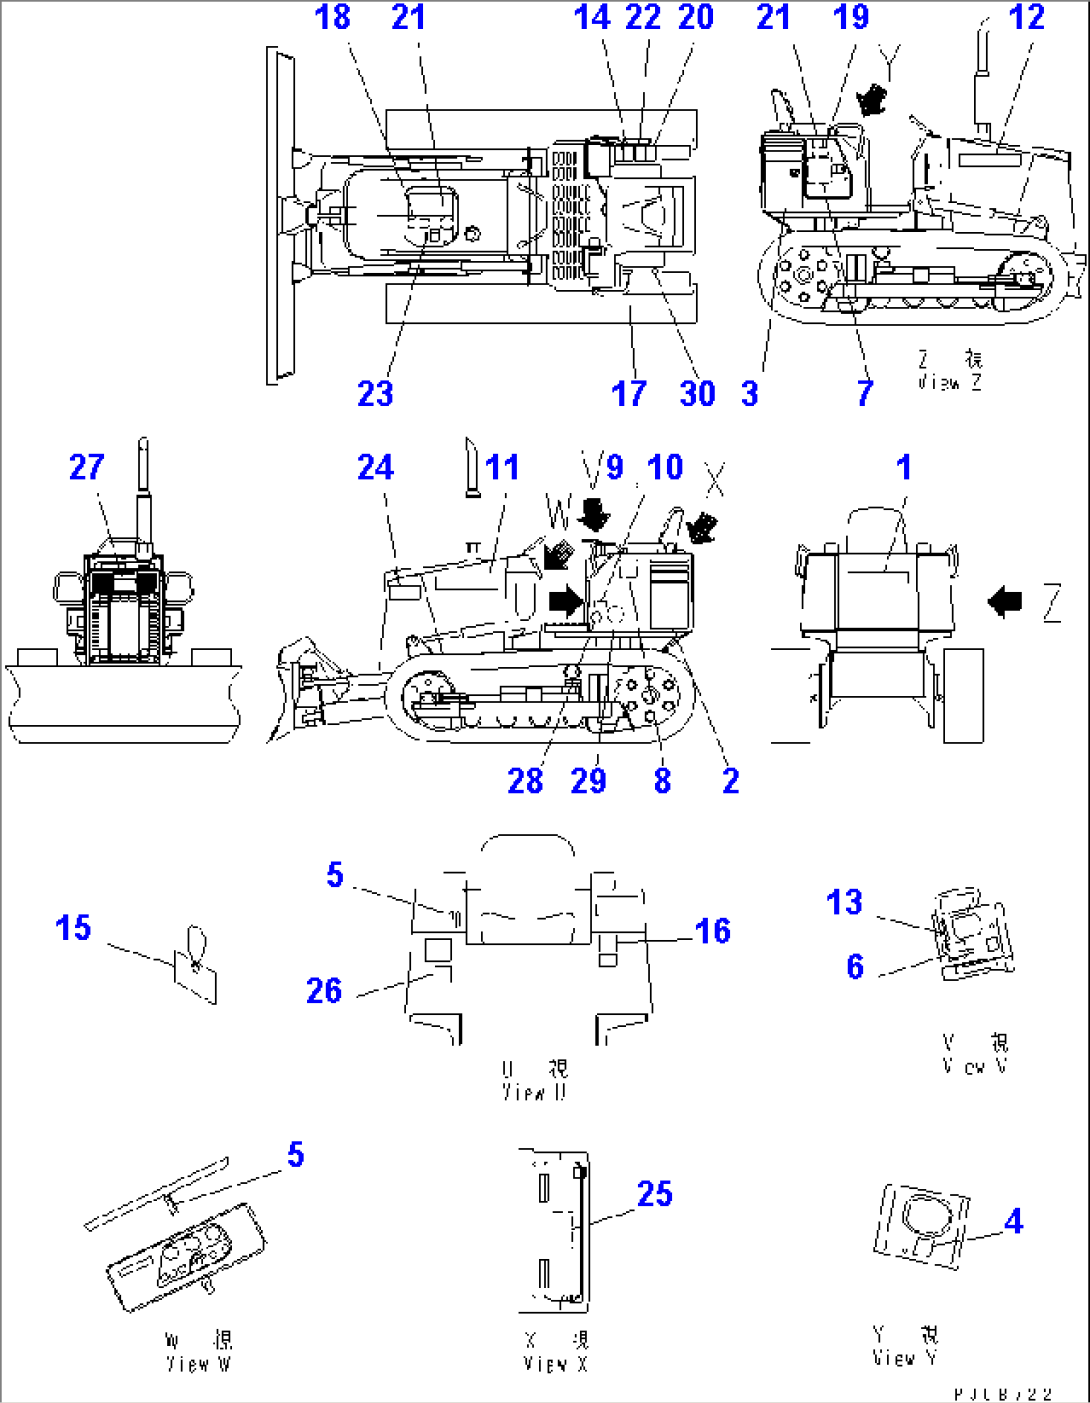 MARKS AND PLATES (JAPANESE) (FOR ROPS CAB)